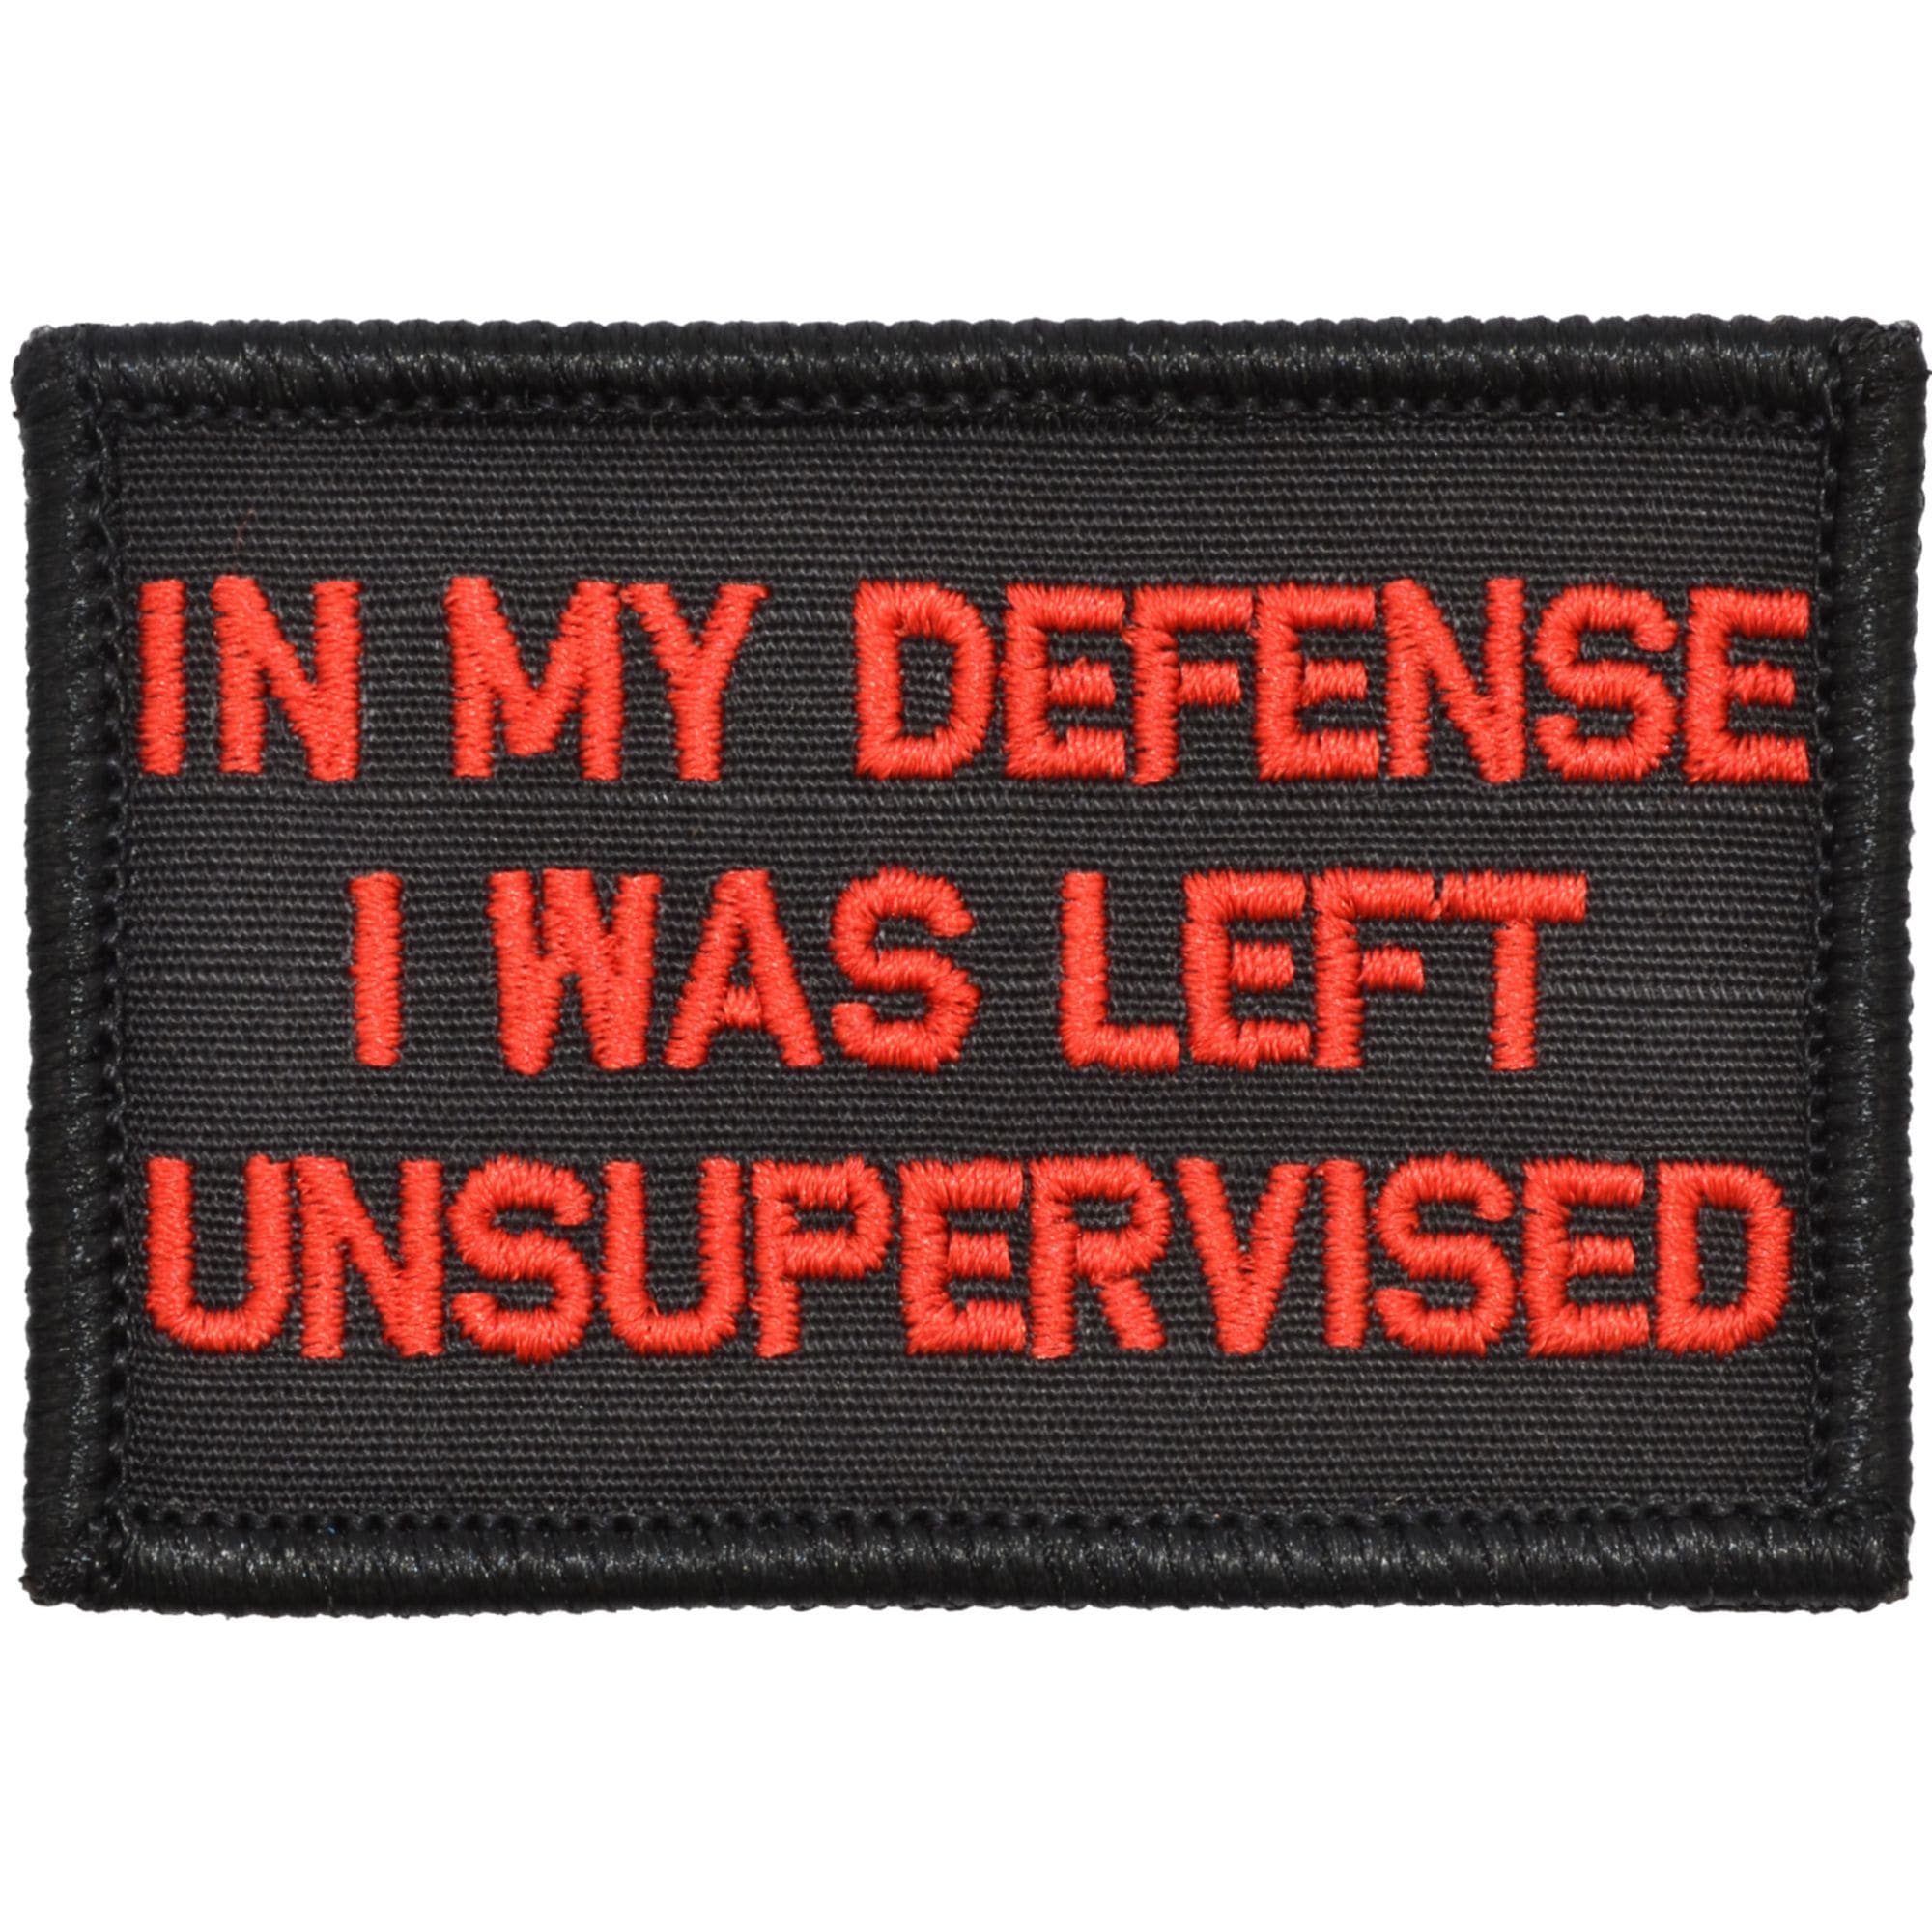 Tactical Gear Junkie Patches Black w/ Red In My Defense I Was Left Unsupervised - 2x3 Patch